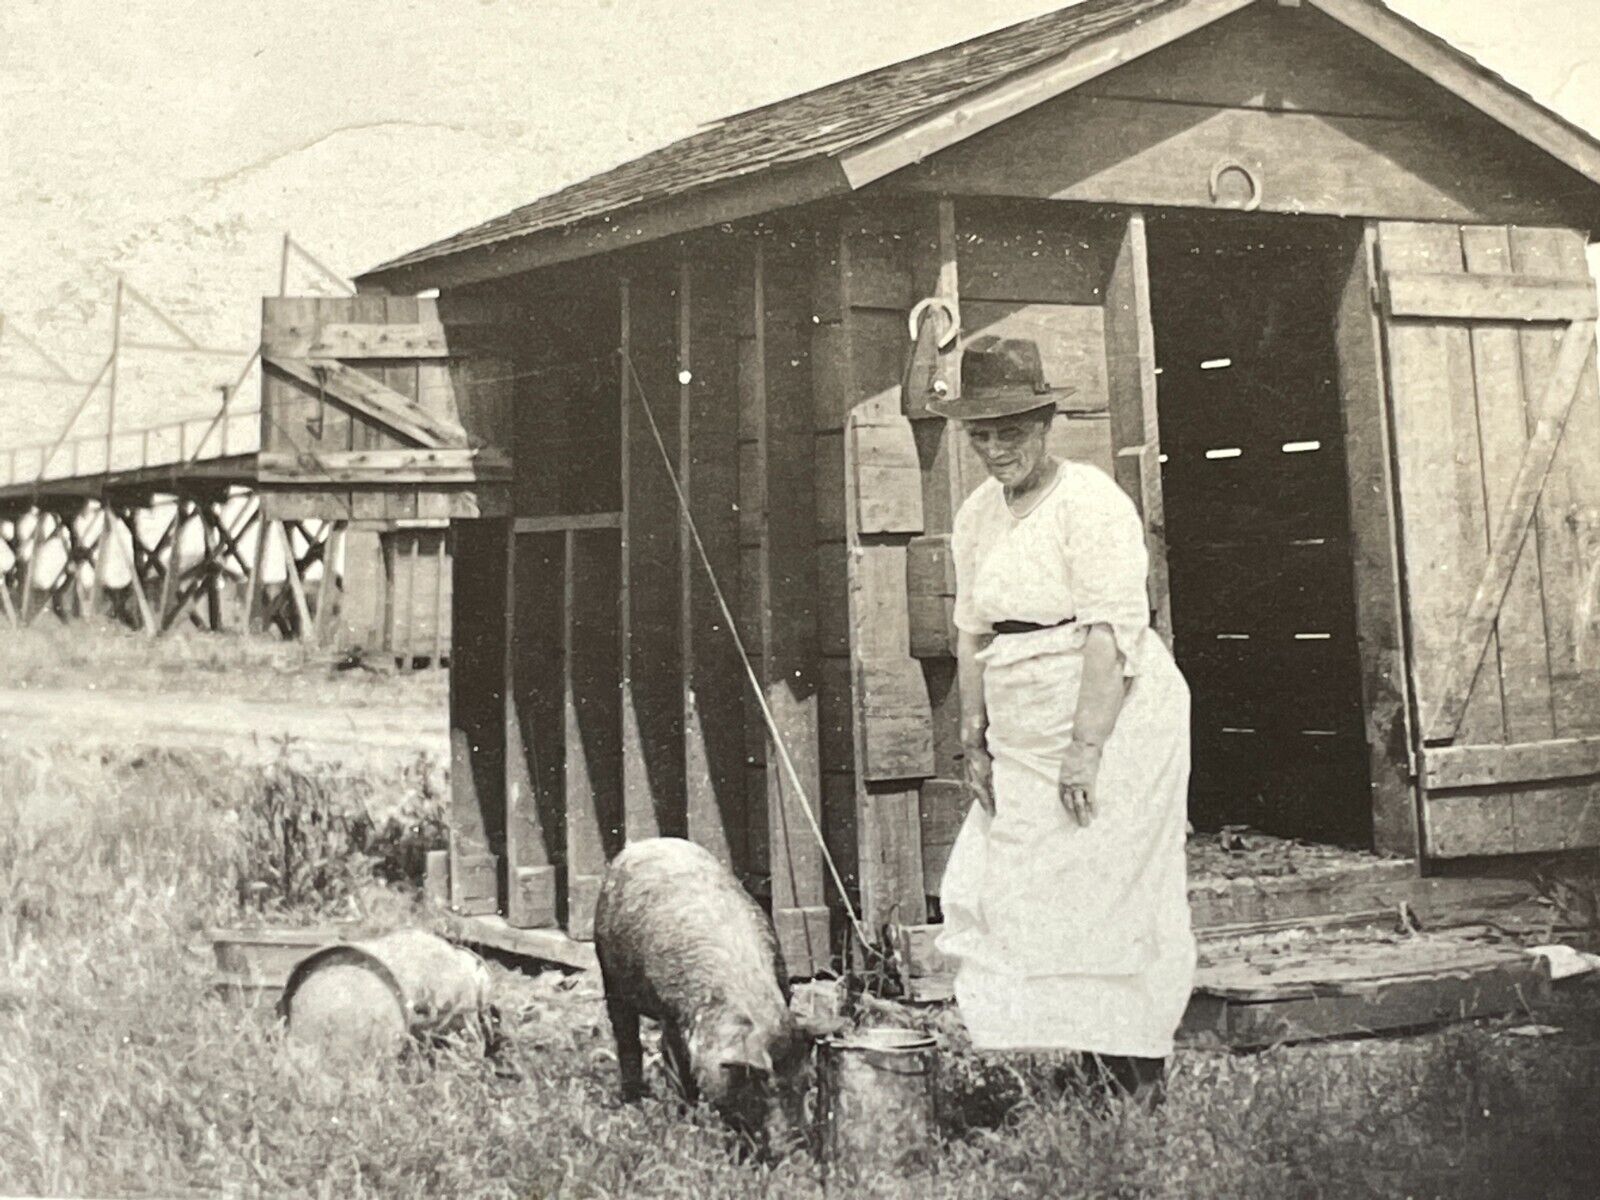 i7 Photograph Old Woman In Hat Shack Feeding Pig Partially Obstructed Foreground